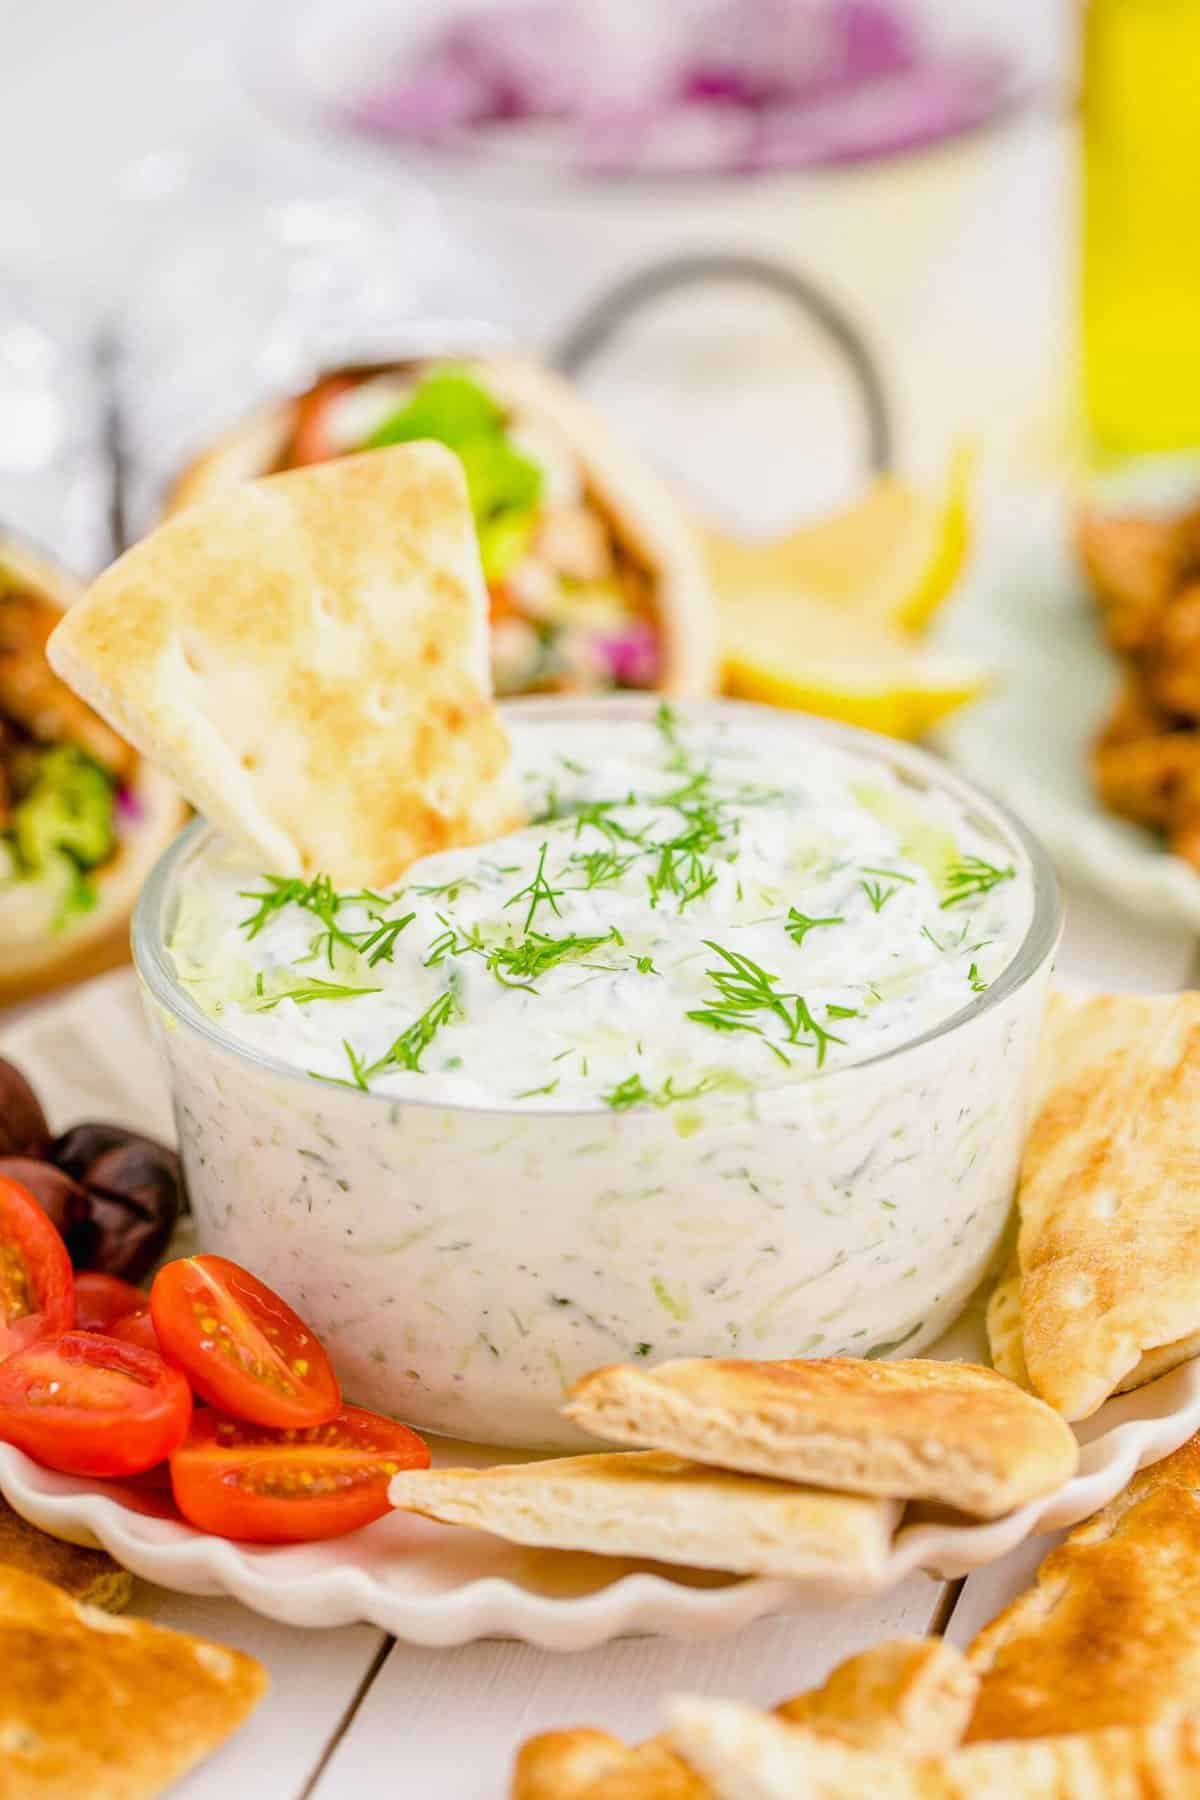 Tzatziki dip in glass bowl on plate with pita chips, olives, and halved grape tomatoes